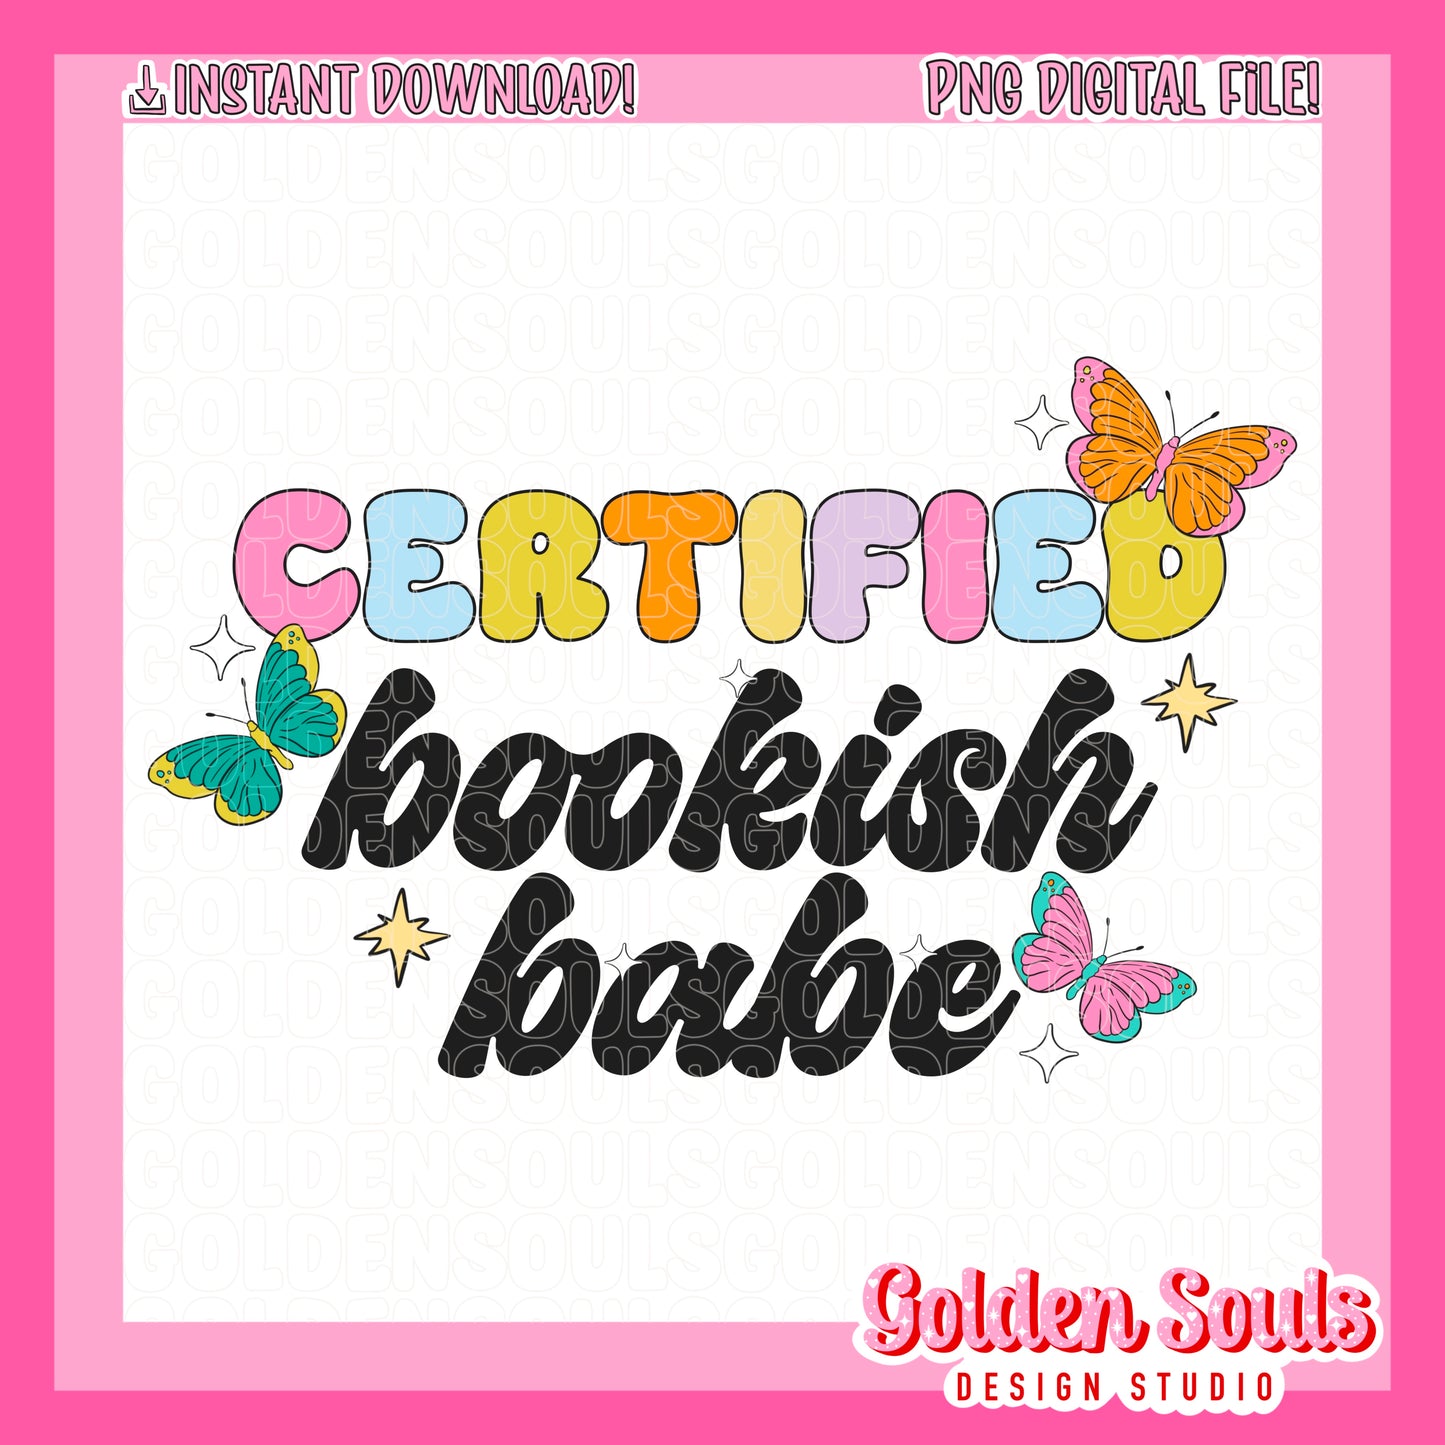 Certified Bookish Babe